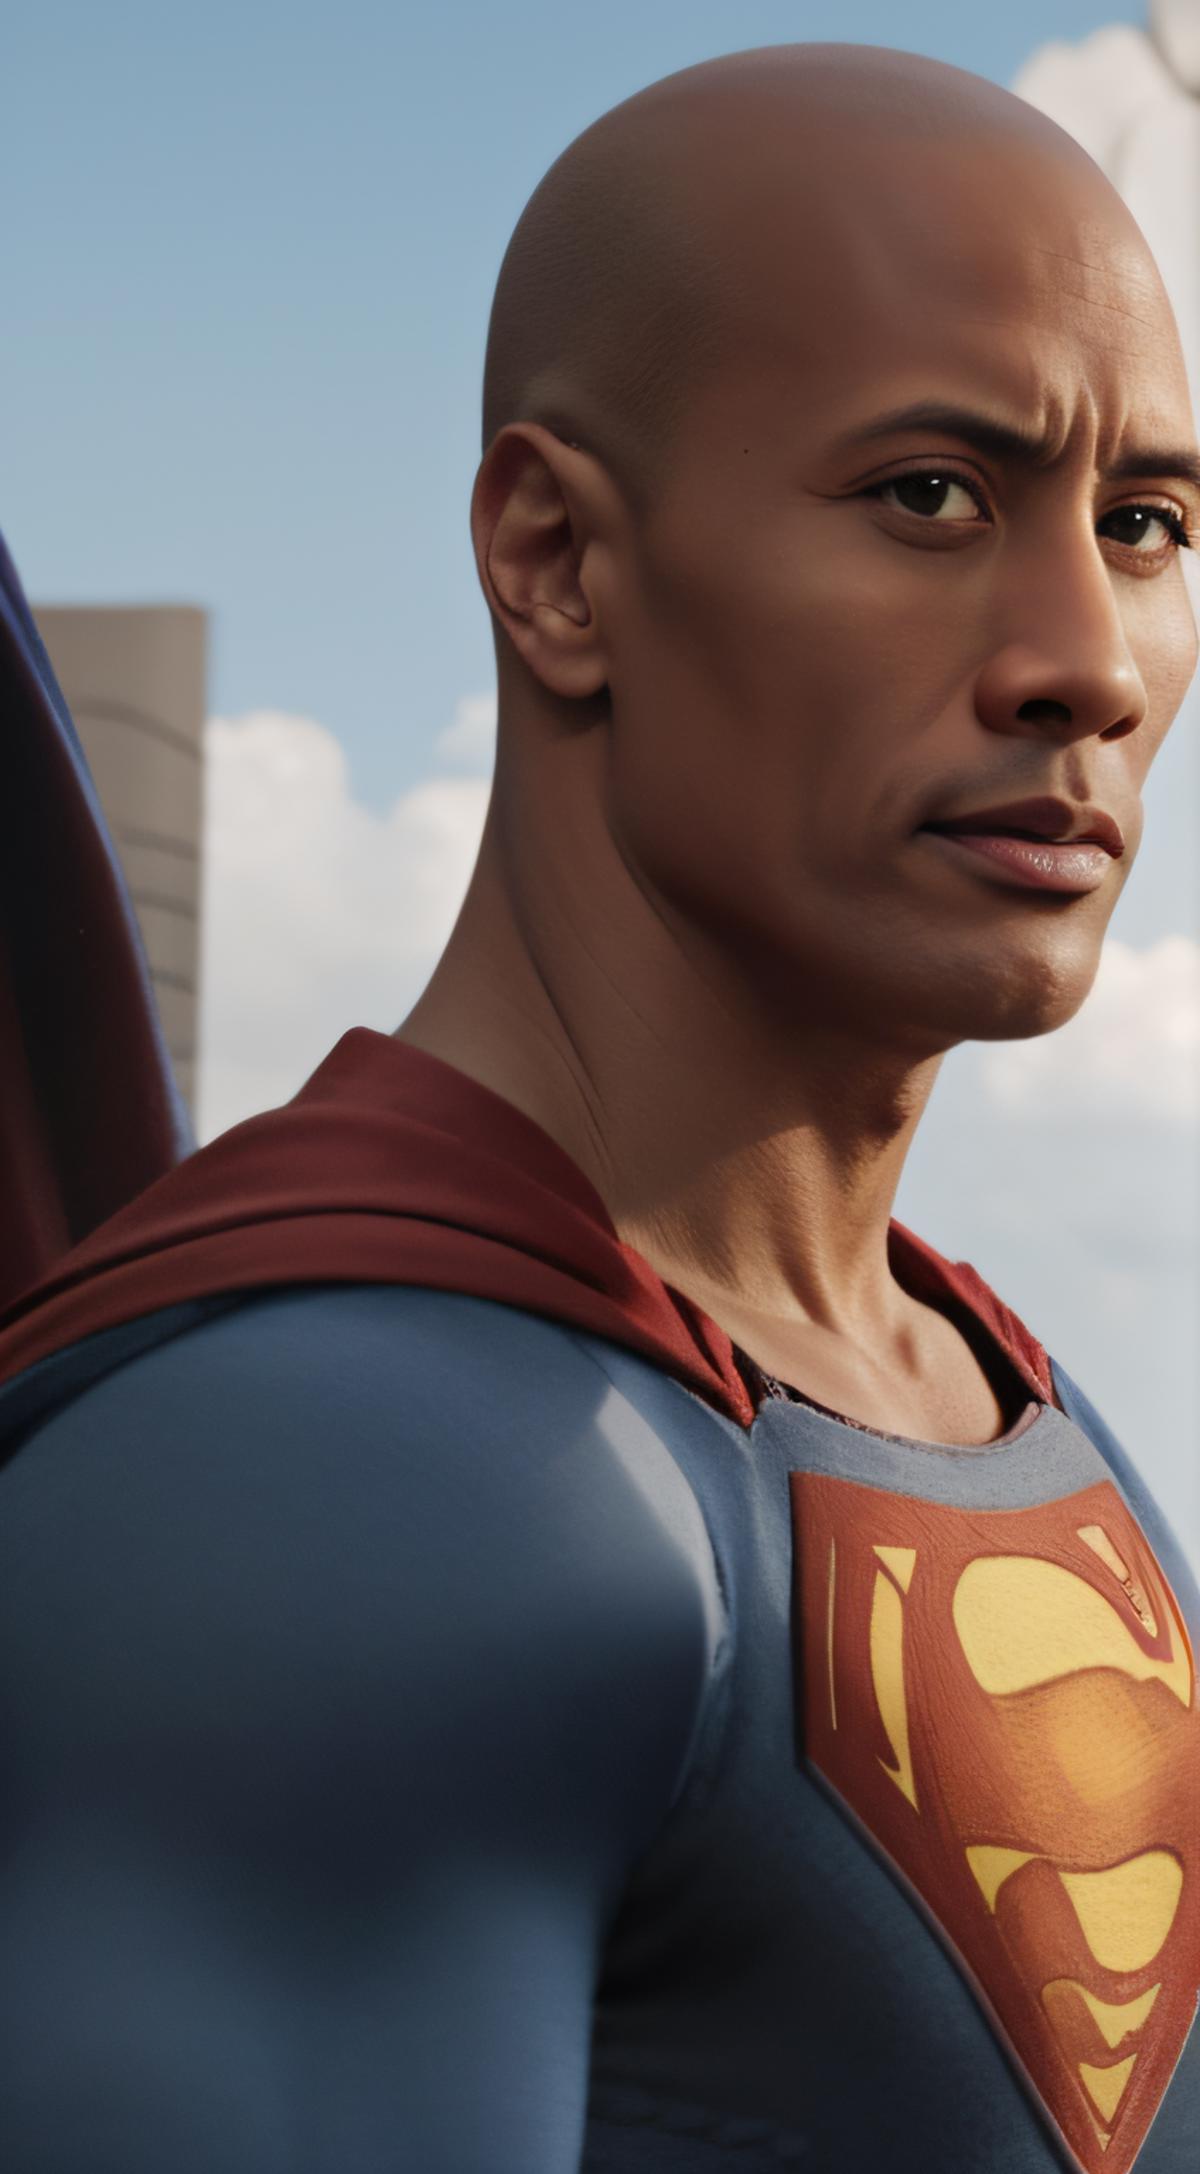 Superman Classic Suit image by markplunder